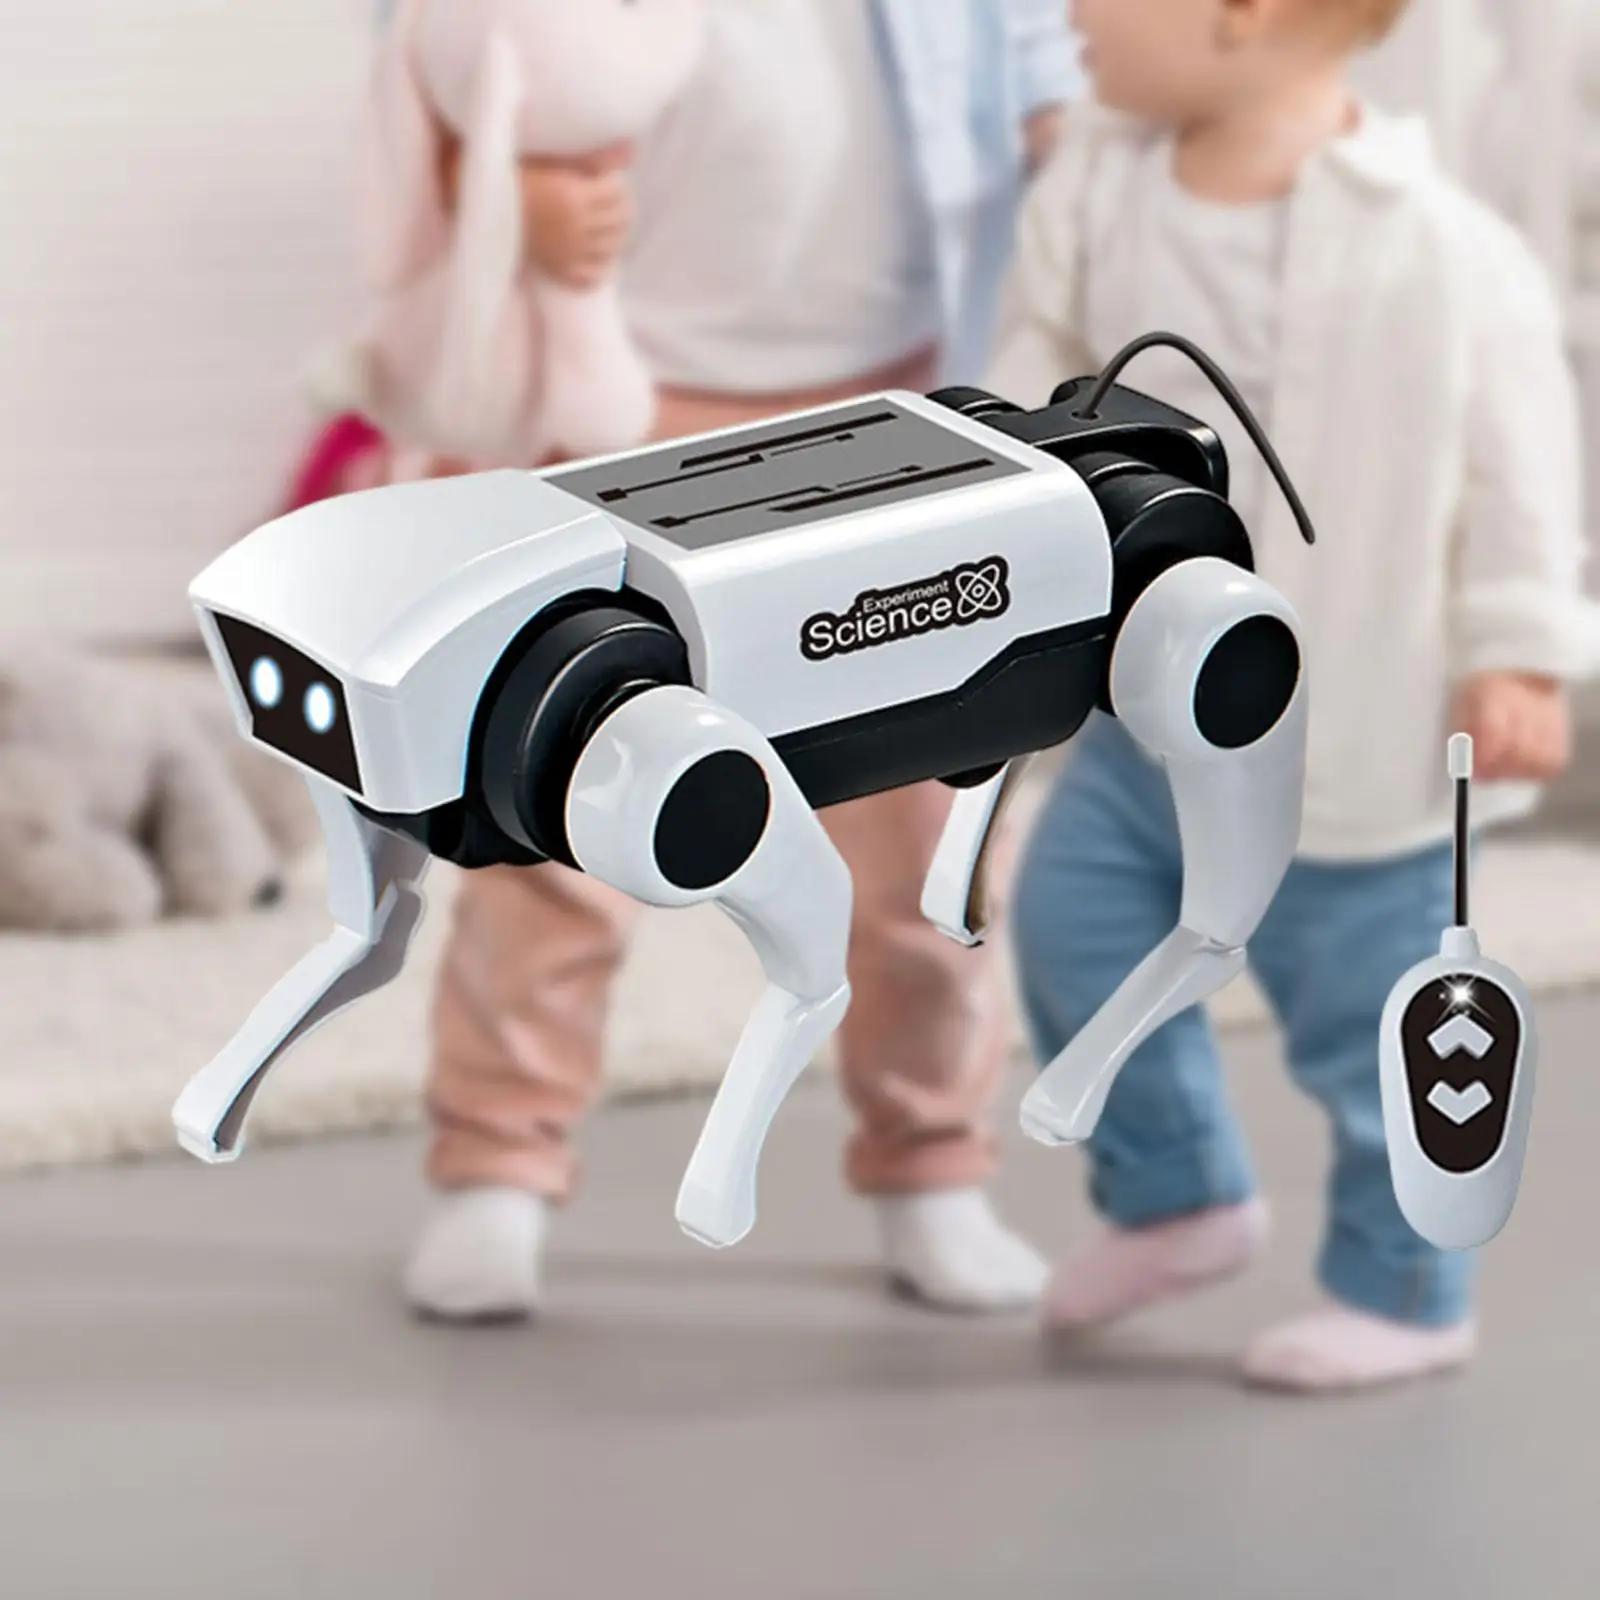 Electric Mechanical Dog Model Building Kits Educational 3D Puzzle Assembly Smart RC Puppy for Kids Children Adults Teens Gifts